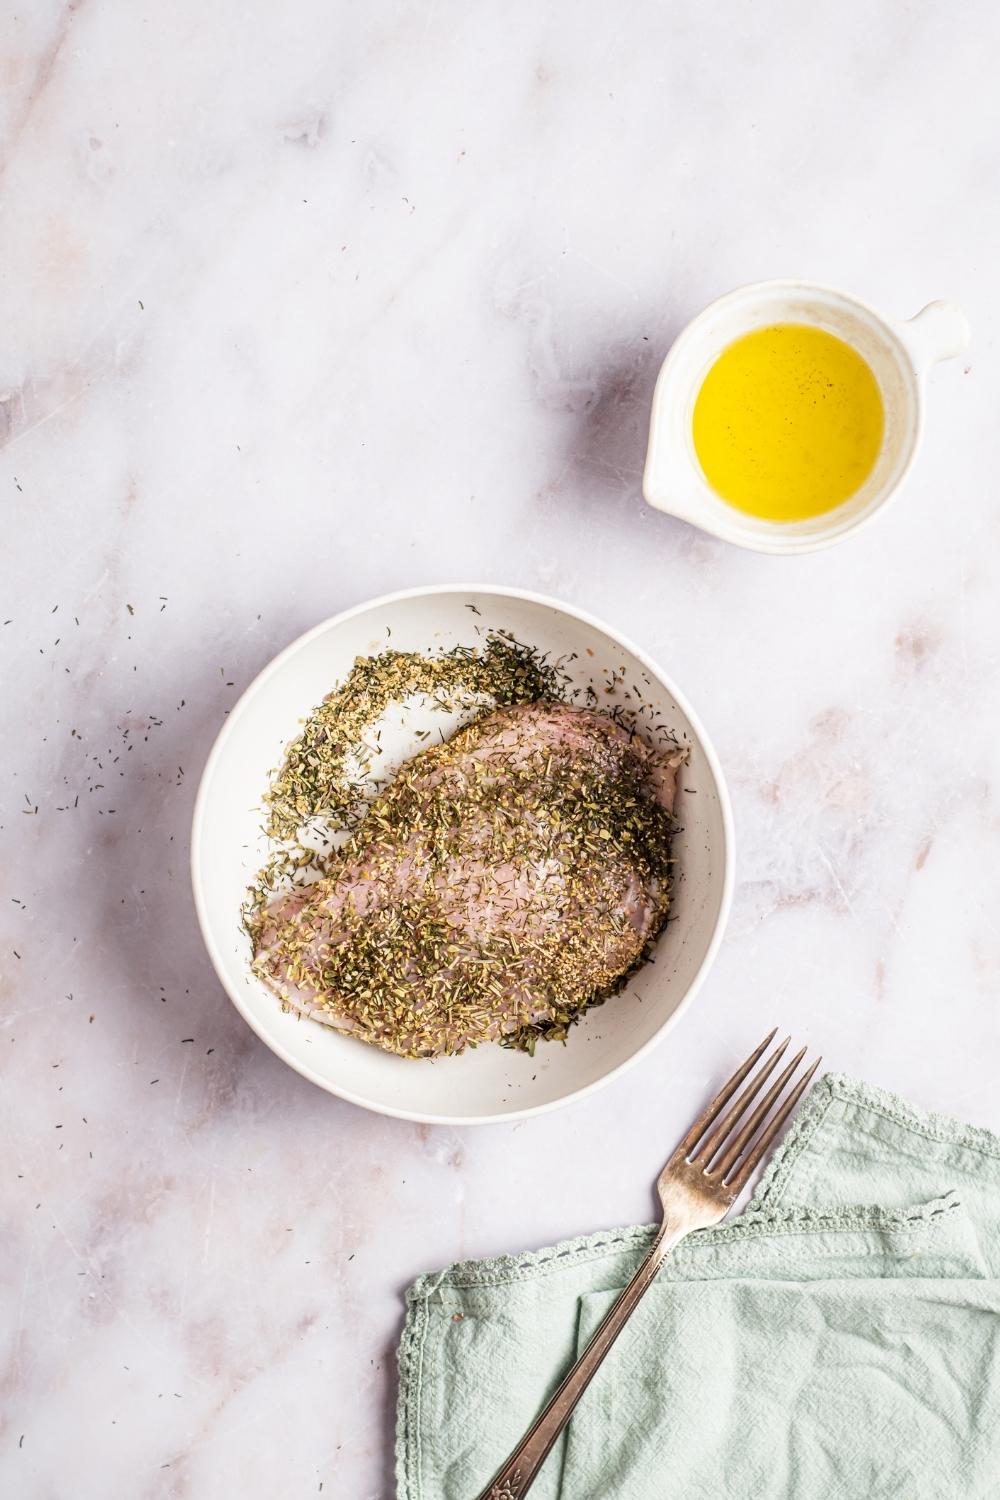 Chicken covered in herb seasoning in a white bowl. A bowl of olive oil is behind it.